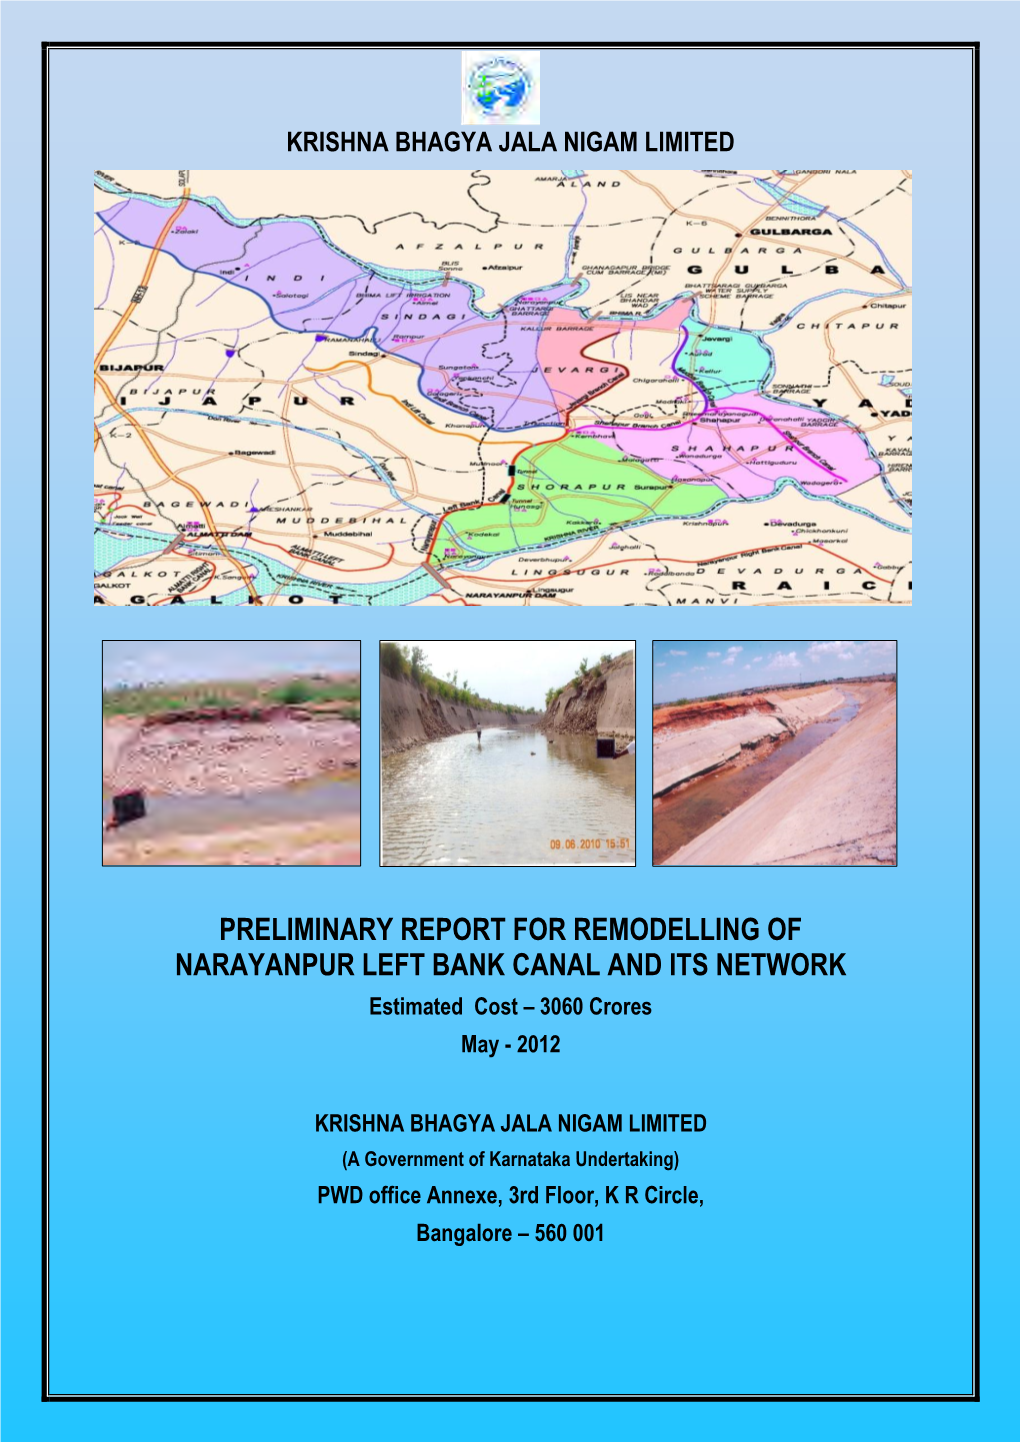 PRELIMINARY REPORT for REMODELLING of NARAYANPUR LEFT BANK CANAL and ITS NETWORK Estimated Cost – 3060 Crores May - 2012